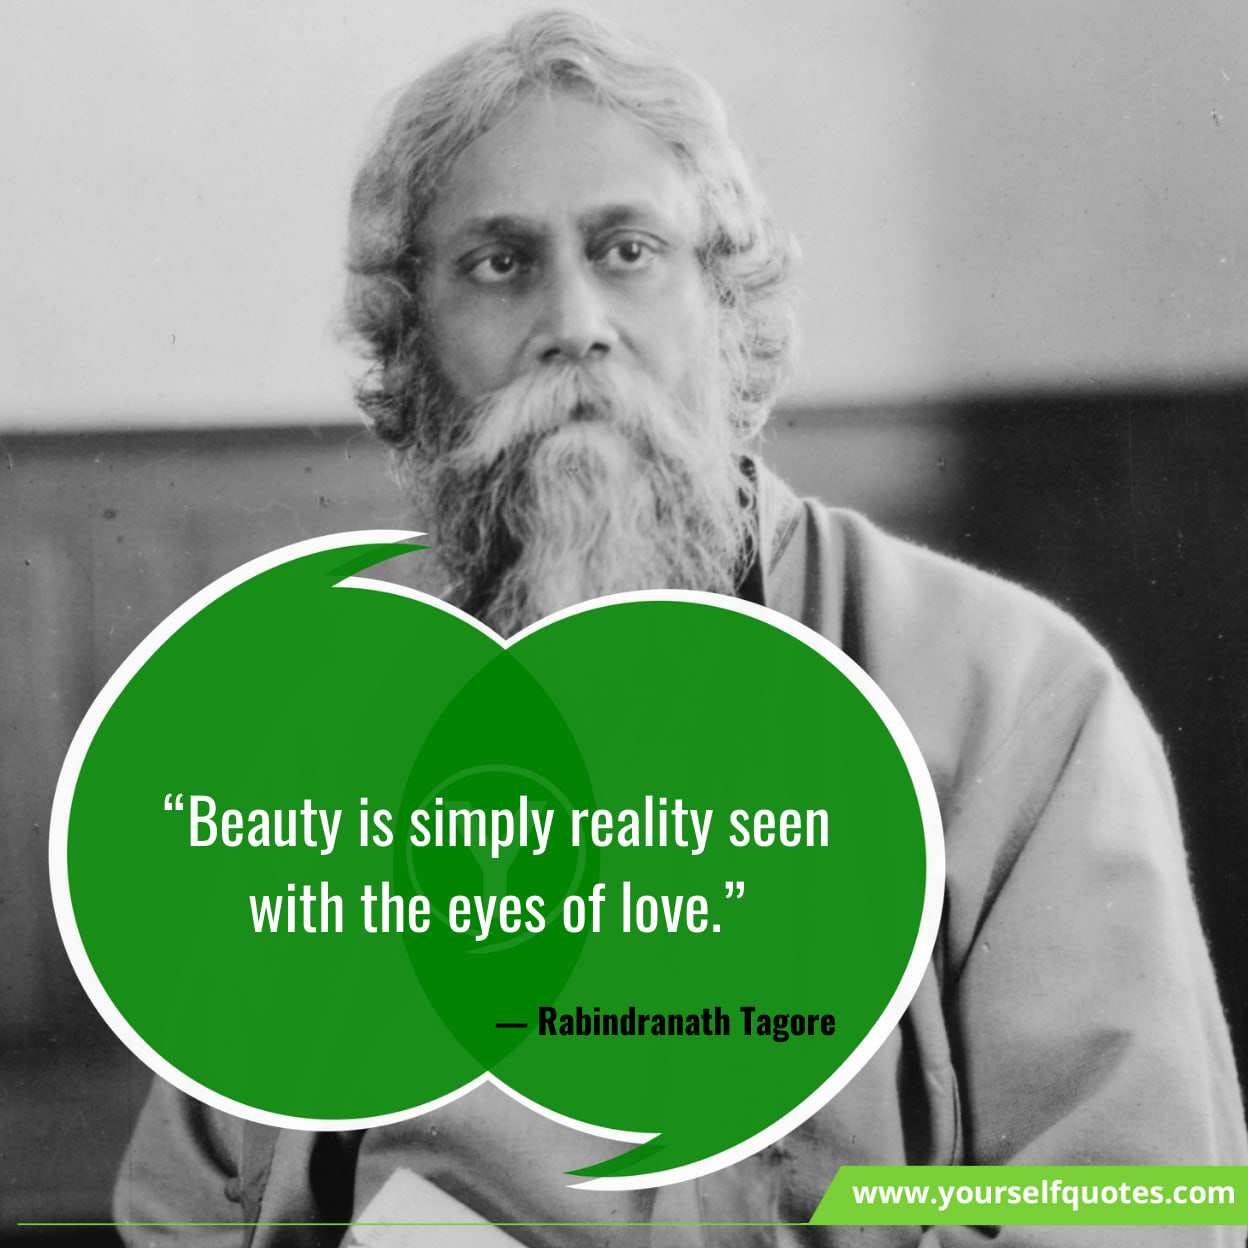 about rabindranath tagore in english